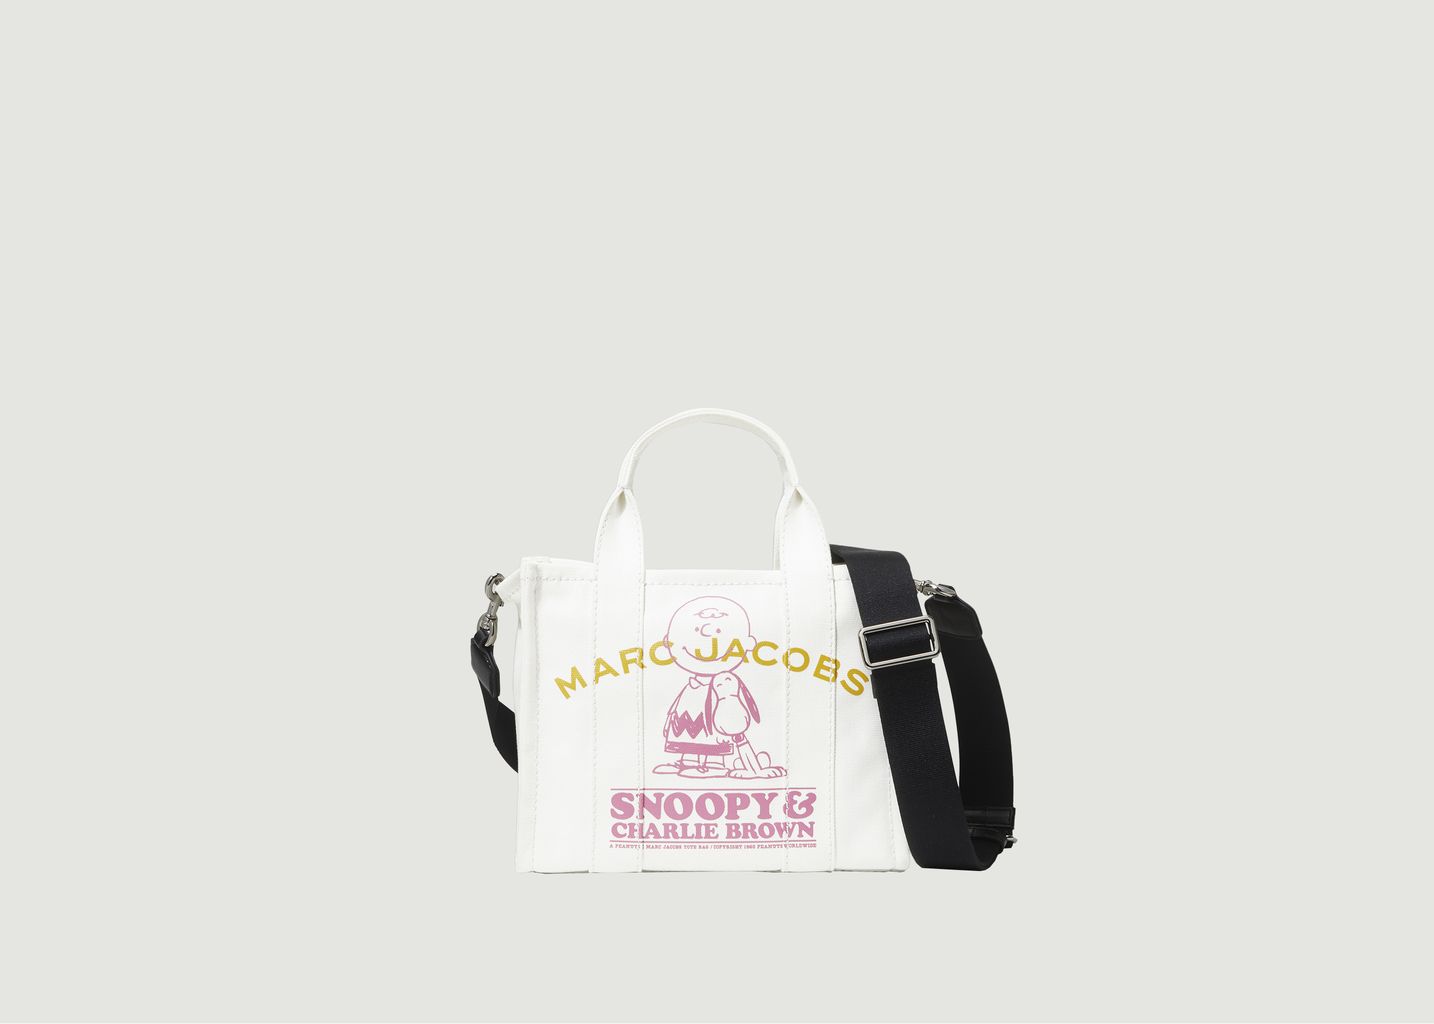 Mini Traveler Tote Peanuts Marc Jacobs x Snoopy - Marc Jacobs (THE)